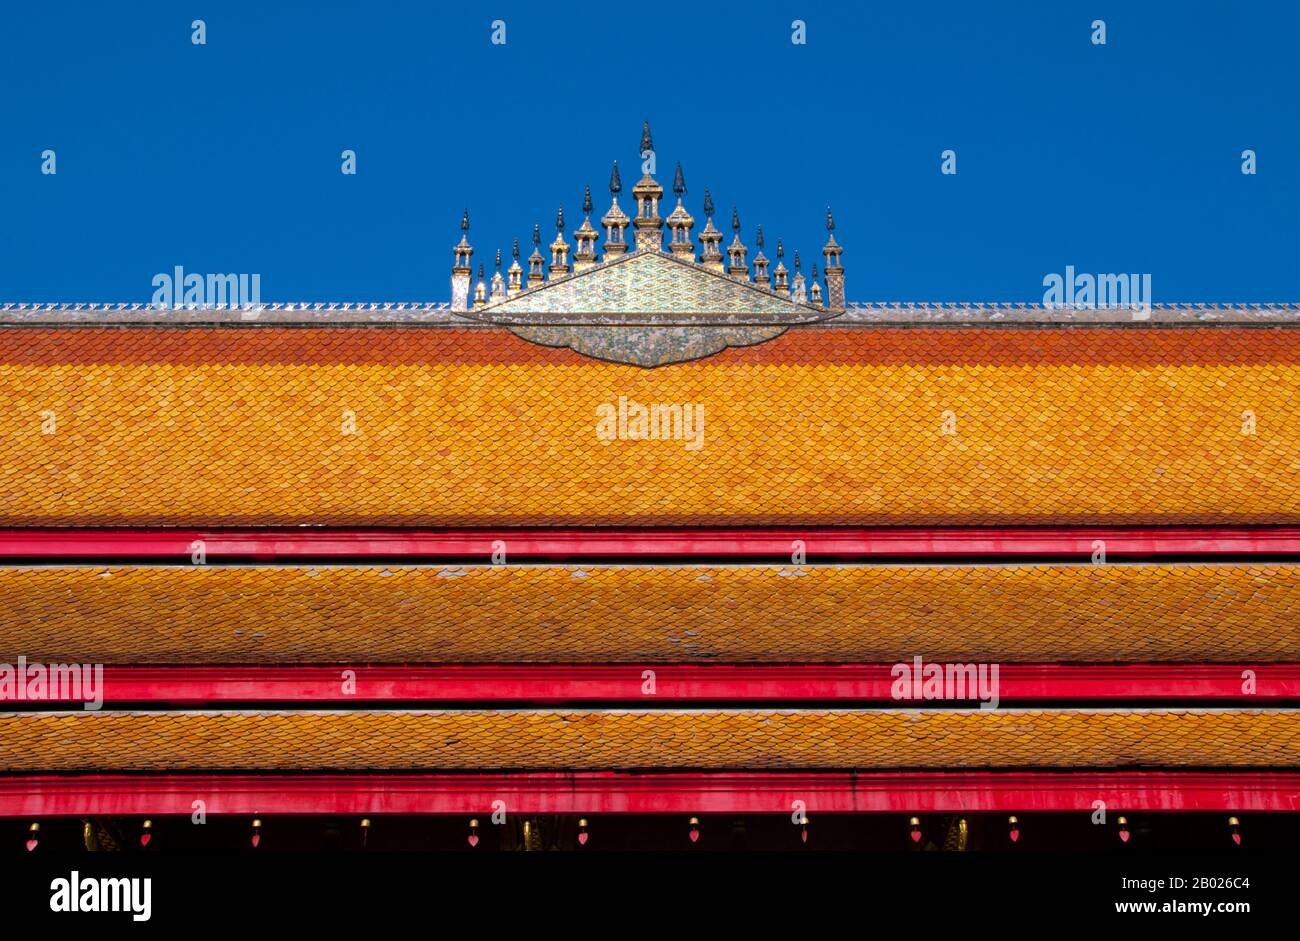 Dok so faa are elaborate temple roof decorations that usually represent the universe and Mount Meru.  Mount Meru (Sanskrit: मेरु), also called Sumeru i.e. the 'Excellent Meru' and Mahameru i.e. 'Great Meru' (Japanese: 須弥山 Shumi-sen), is a sacred mountain in Hindu, Jain as well as Buddhist cosmology and is considered to be the center of all the physical, metaphysical and spiritual universes. It is also the abode of Lord Brahma and the Demi-Gods (Dev).   Wat Nong Sikhounmuang (Sikhunmuang) was originally built in 1729. It was burnt down in 1774, but the bronze Buddha statue that can still be fou Stock Photo